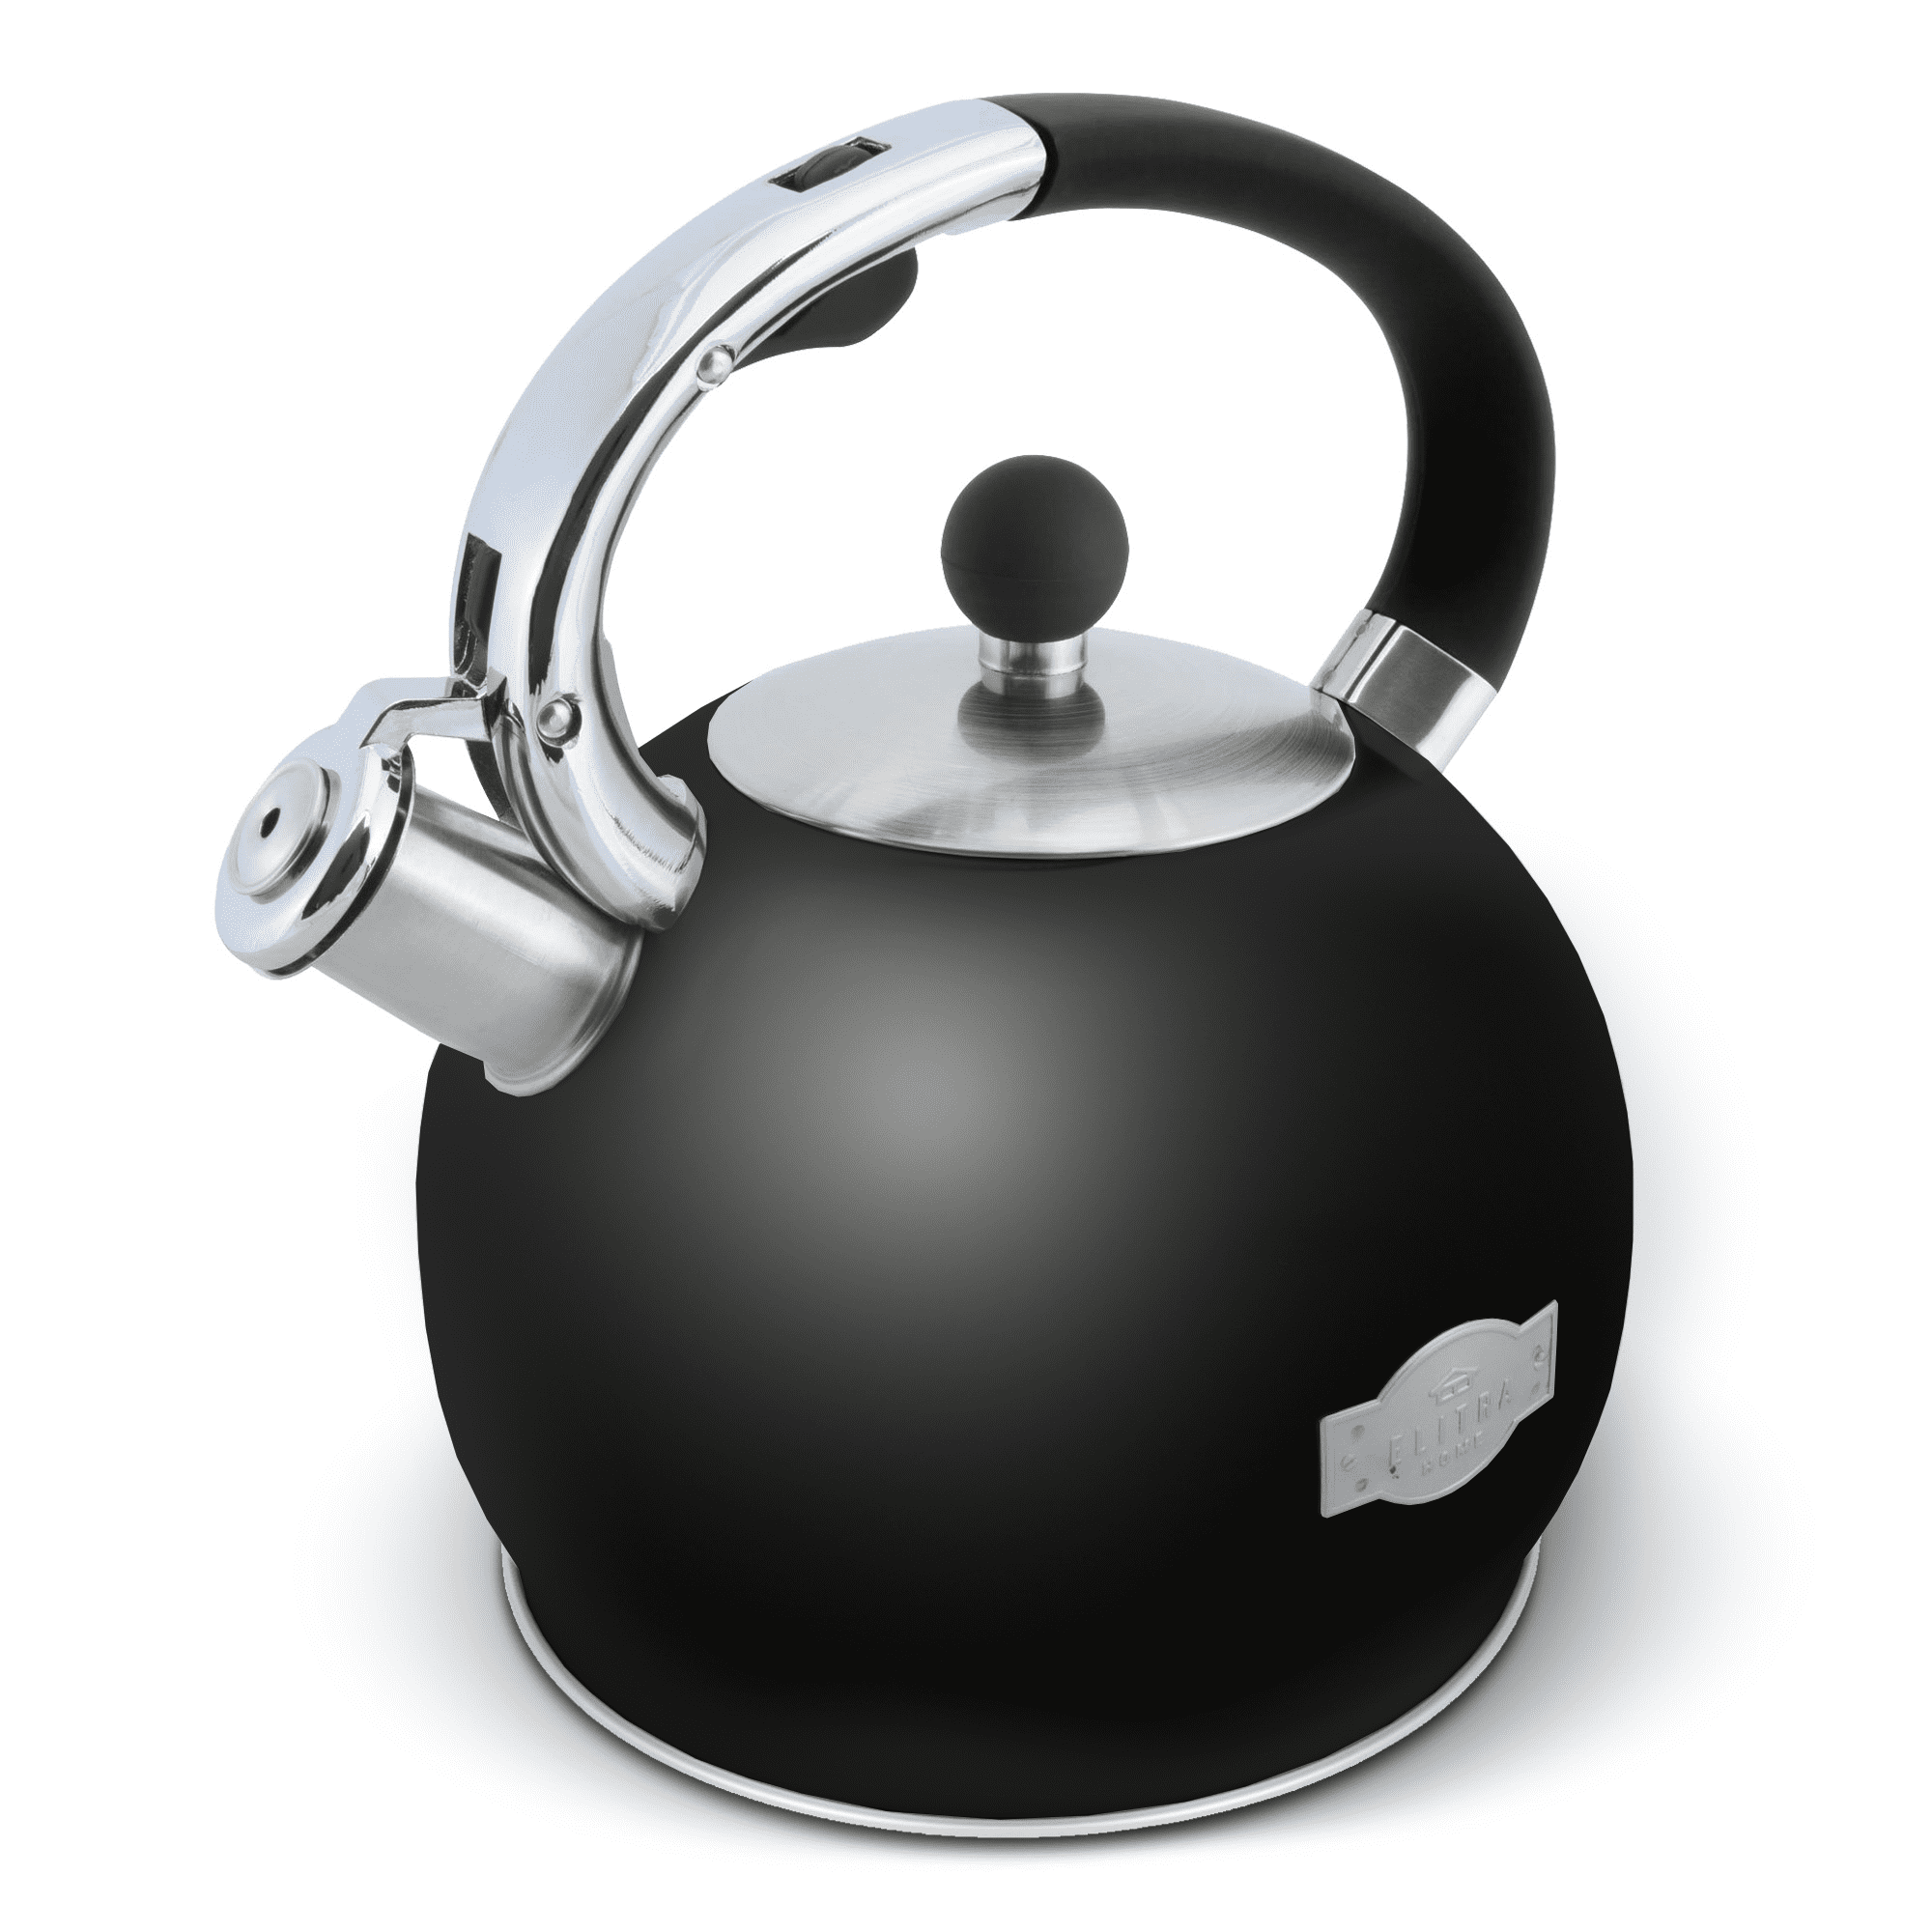 Yipa Tea Kettle Stovetop 2.5/2.8/3/3.5 Liters Stainless Steel Whistling  Teakettle For Stovetop Tea Pot with Folding Cool Grip Ergonomic Handle  Small